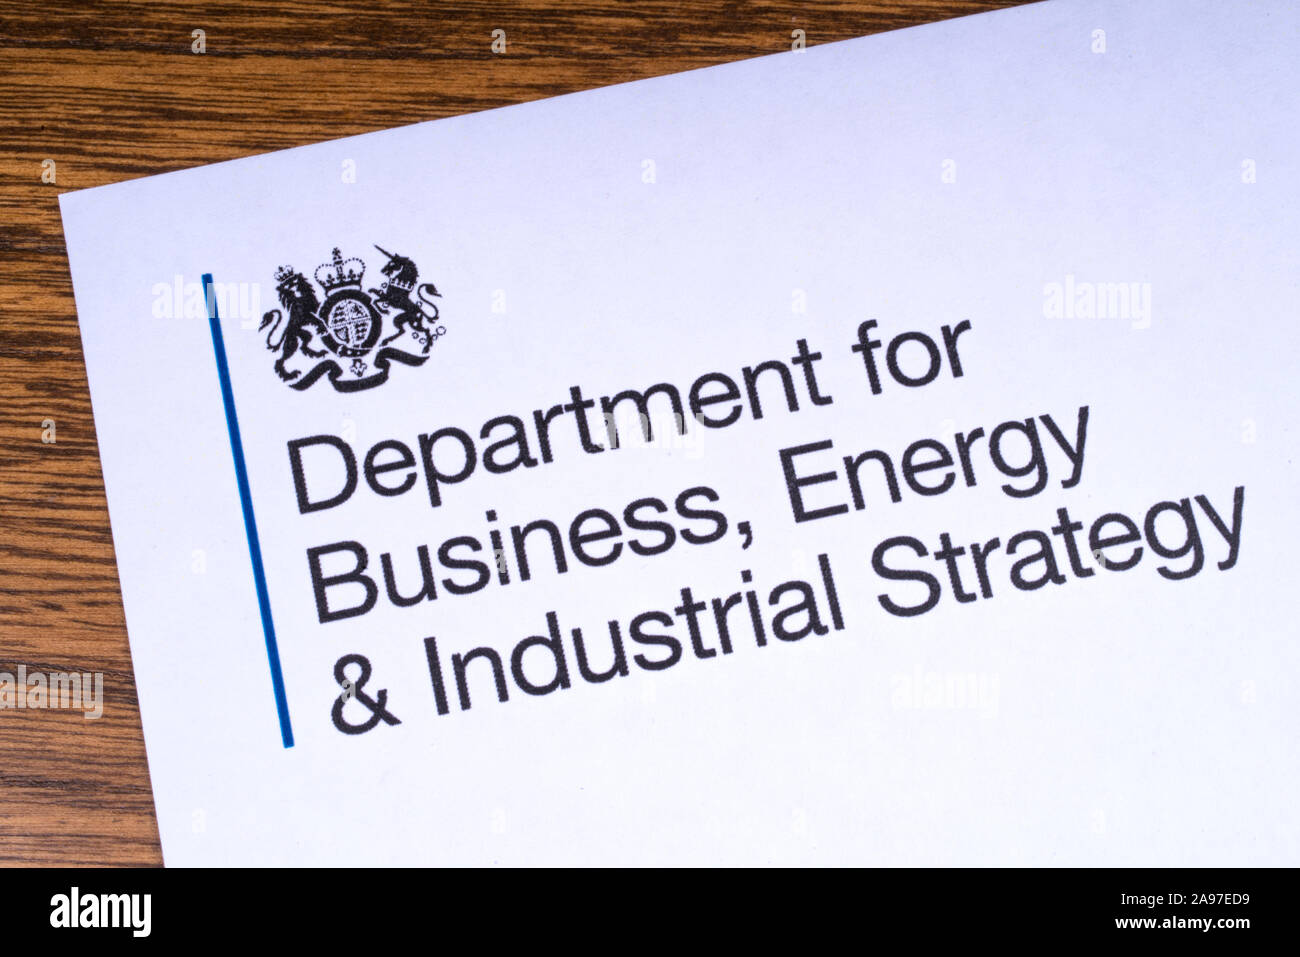 London, UK - March 12th 2019: Close-up of the logo for the Department for Business, Energy and Industrial Strategy, pictured on a piece of paper or le Stock Photo